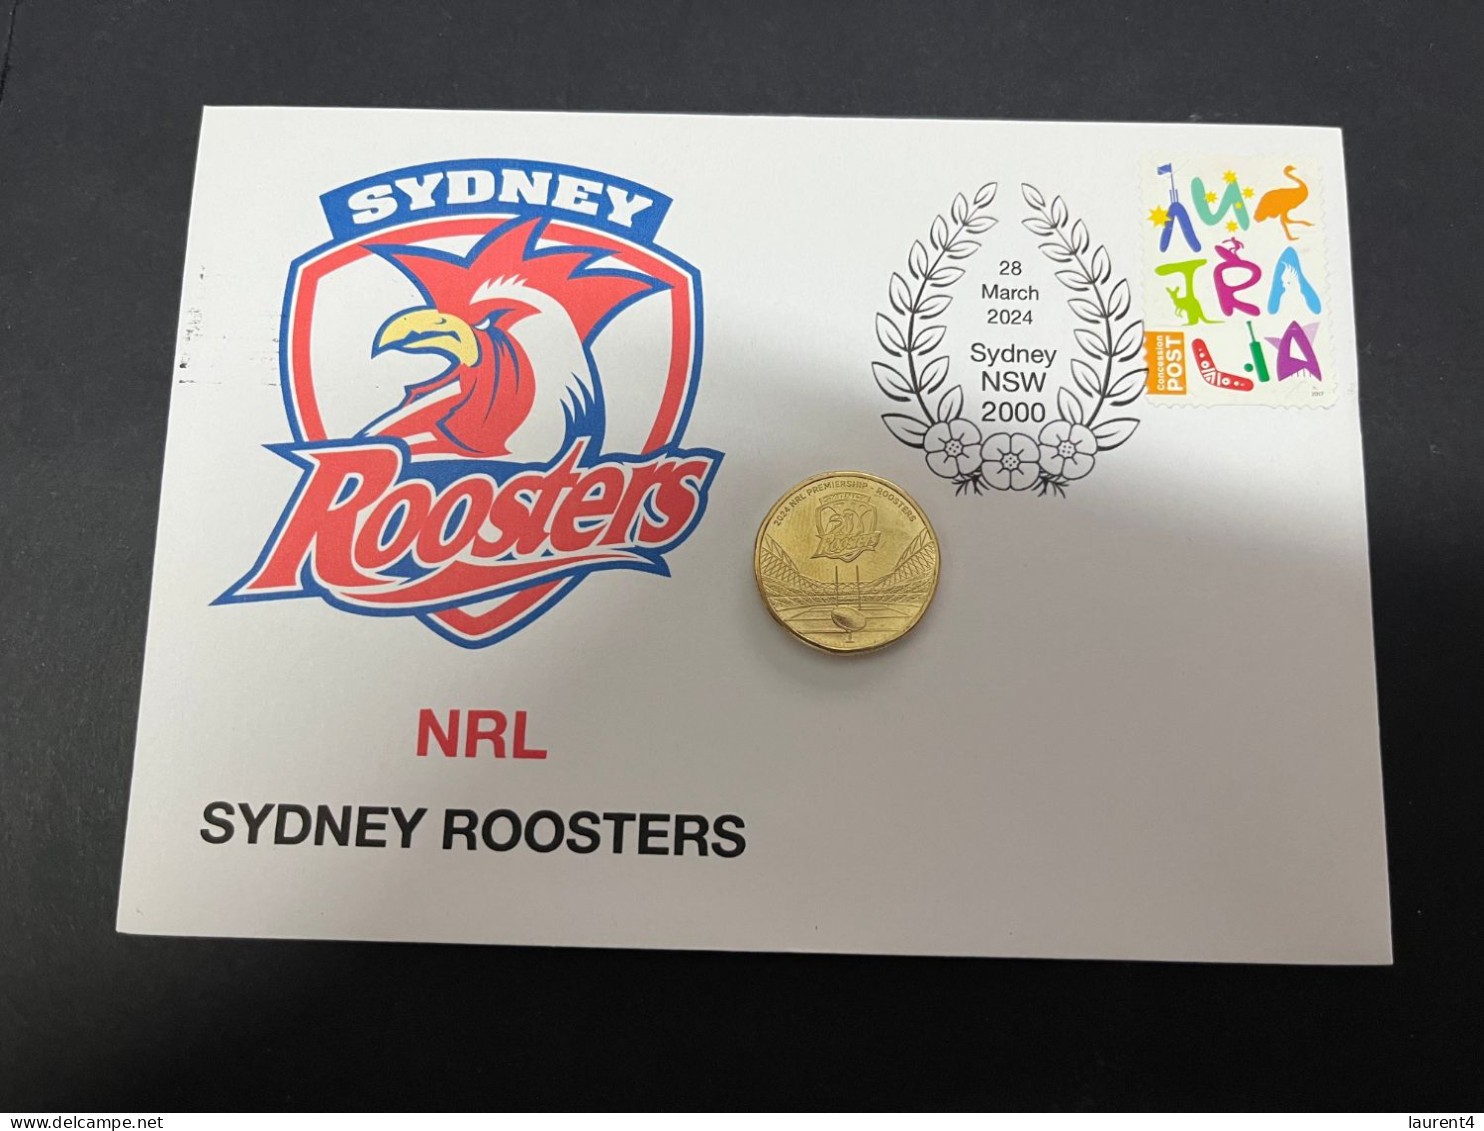 29-3-2024 (4 Y 23) Australian New $ 1.00 Coin (NRL Sydney Roosters) Released 28-3-2024 (1 X Coin On Cover) - Dollar